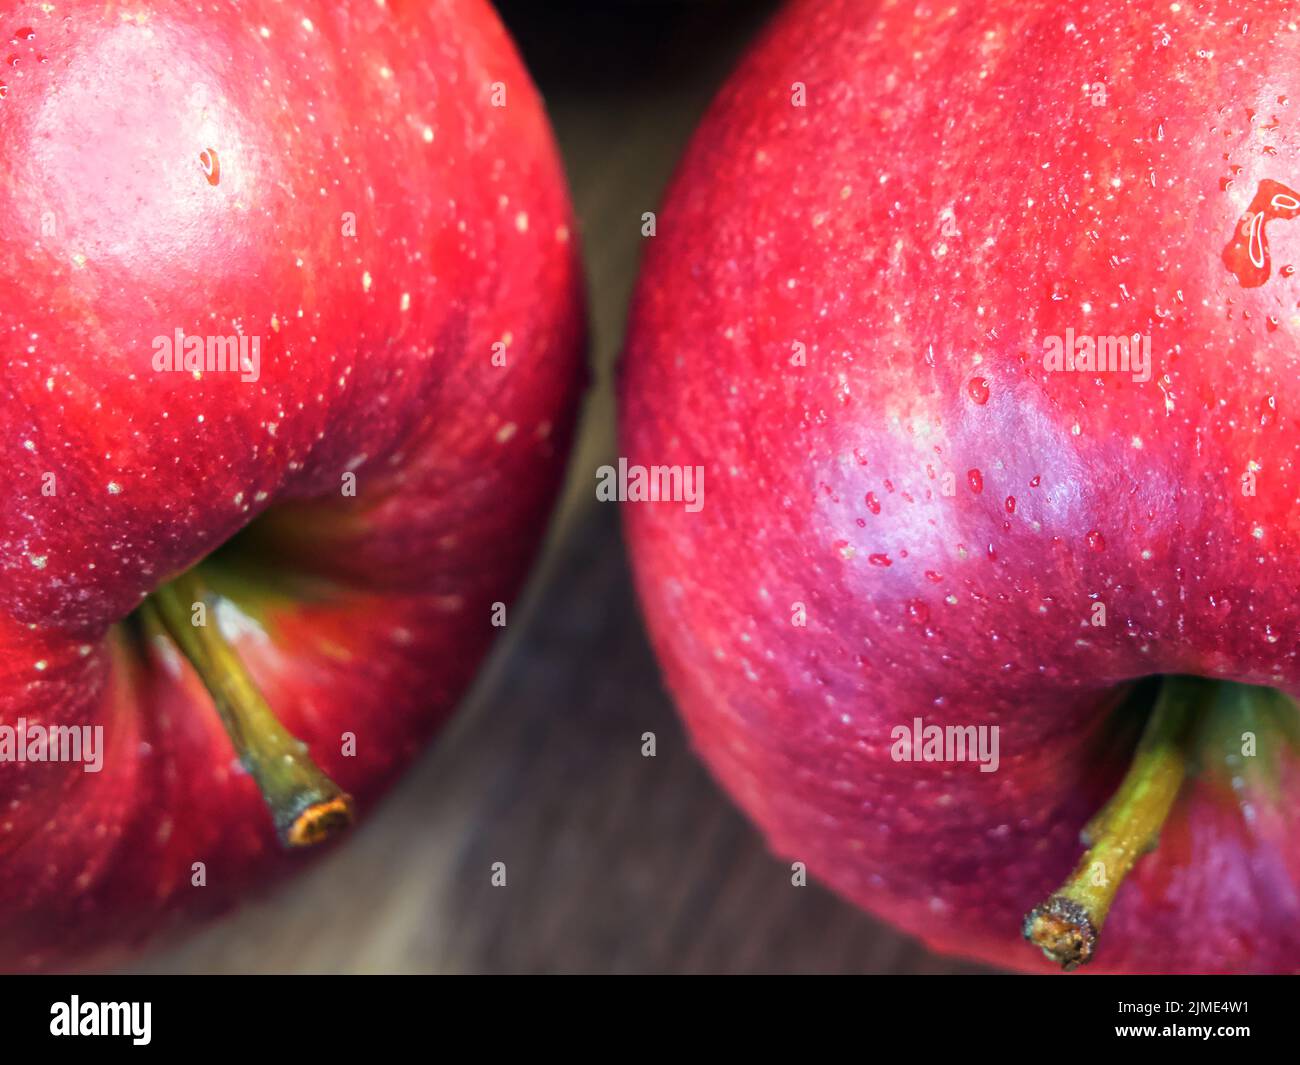 Delicious red apples photographed in macro. Ripe fruit. Juicy Red Apple Stock Photo